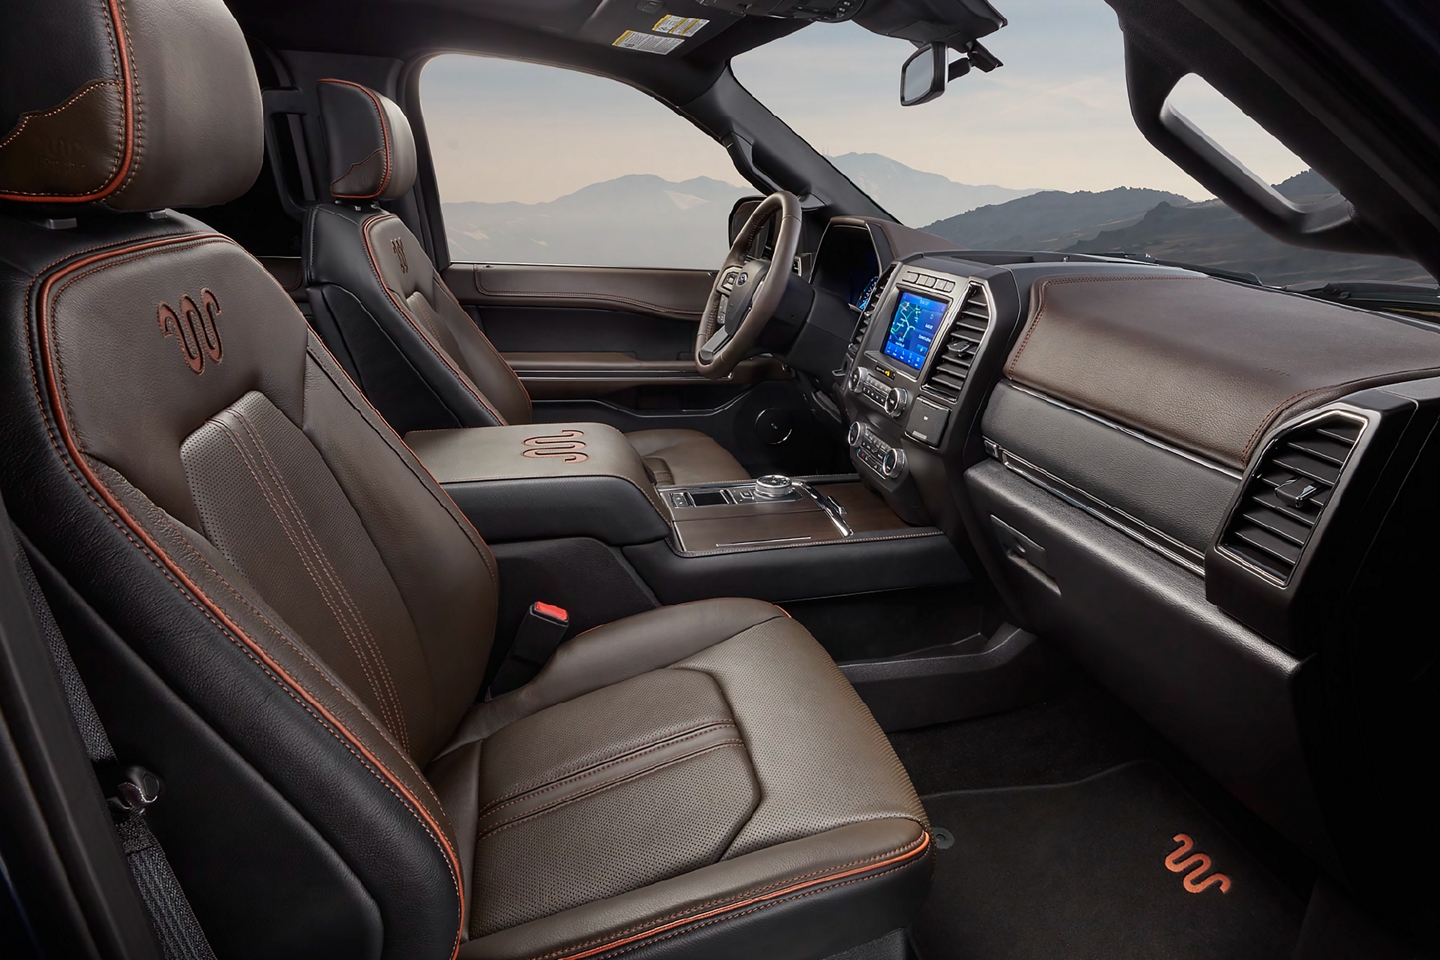 2020 Ford Expedition Interior